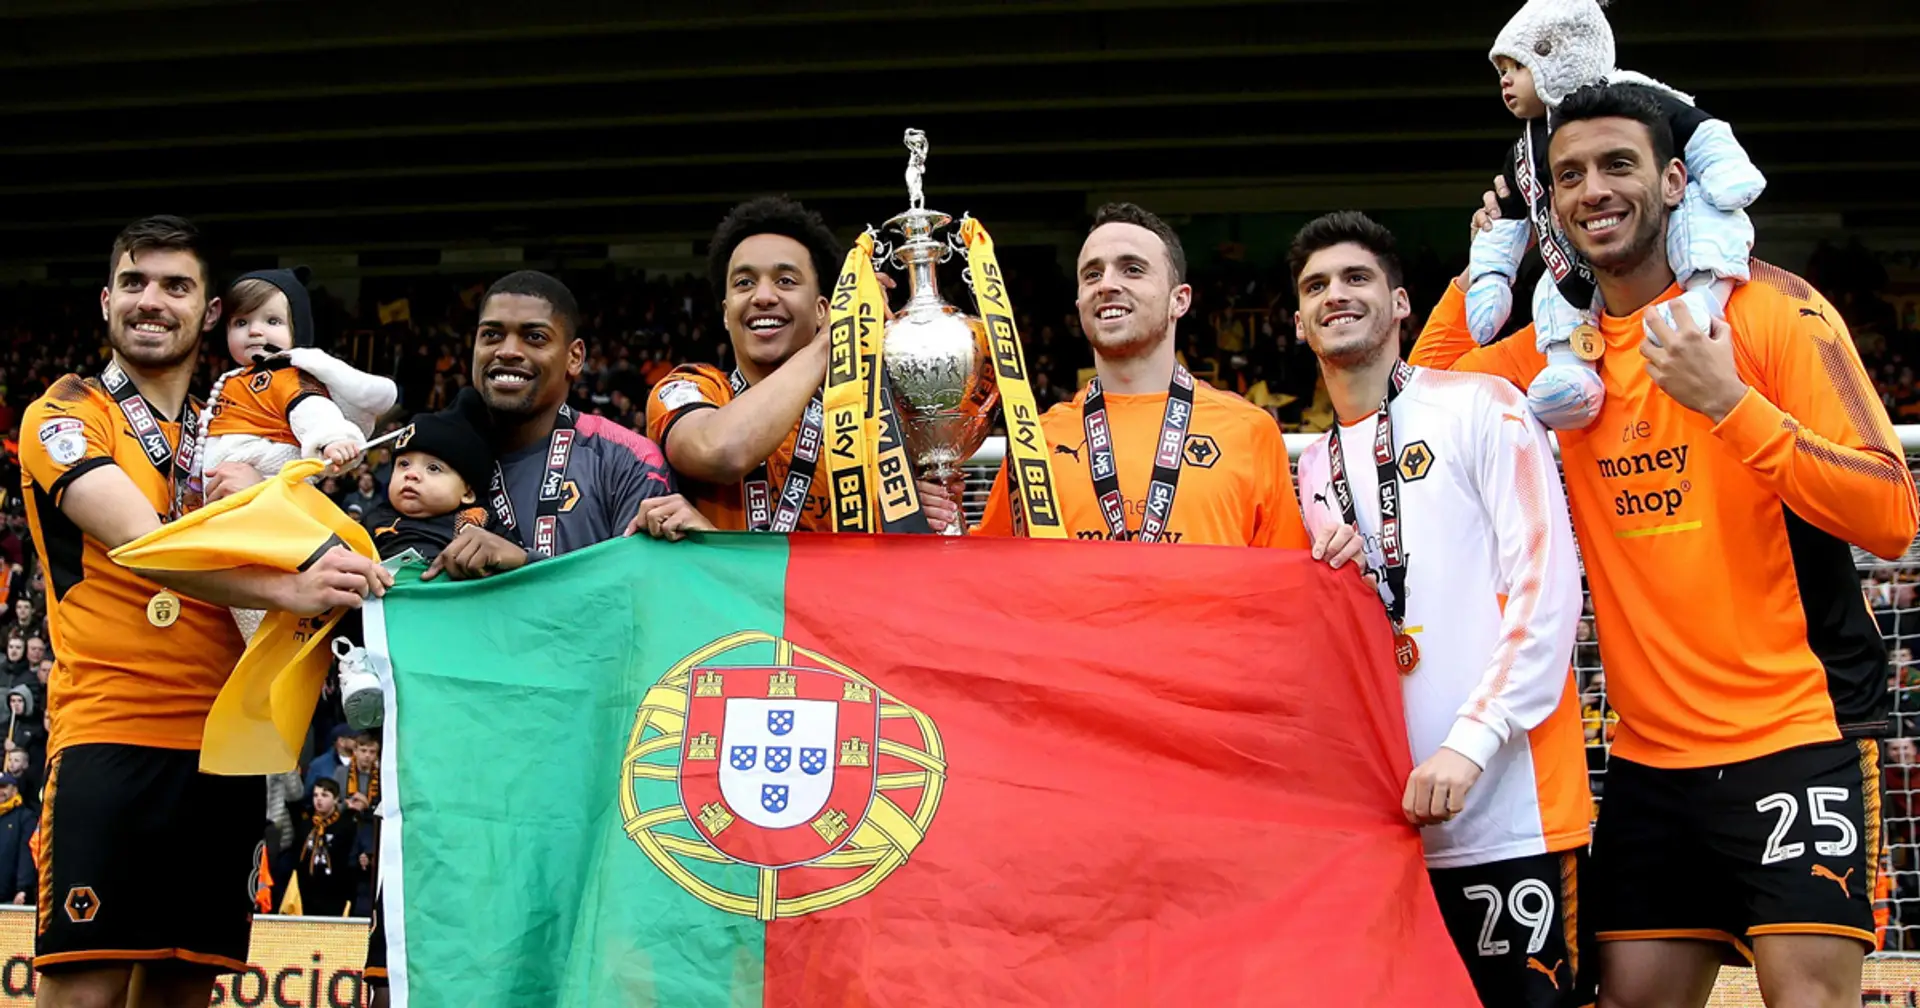 Lusitanic colony on British shores? Wolves have more Portuguese players than 6 Liga NOS sides